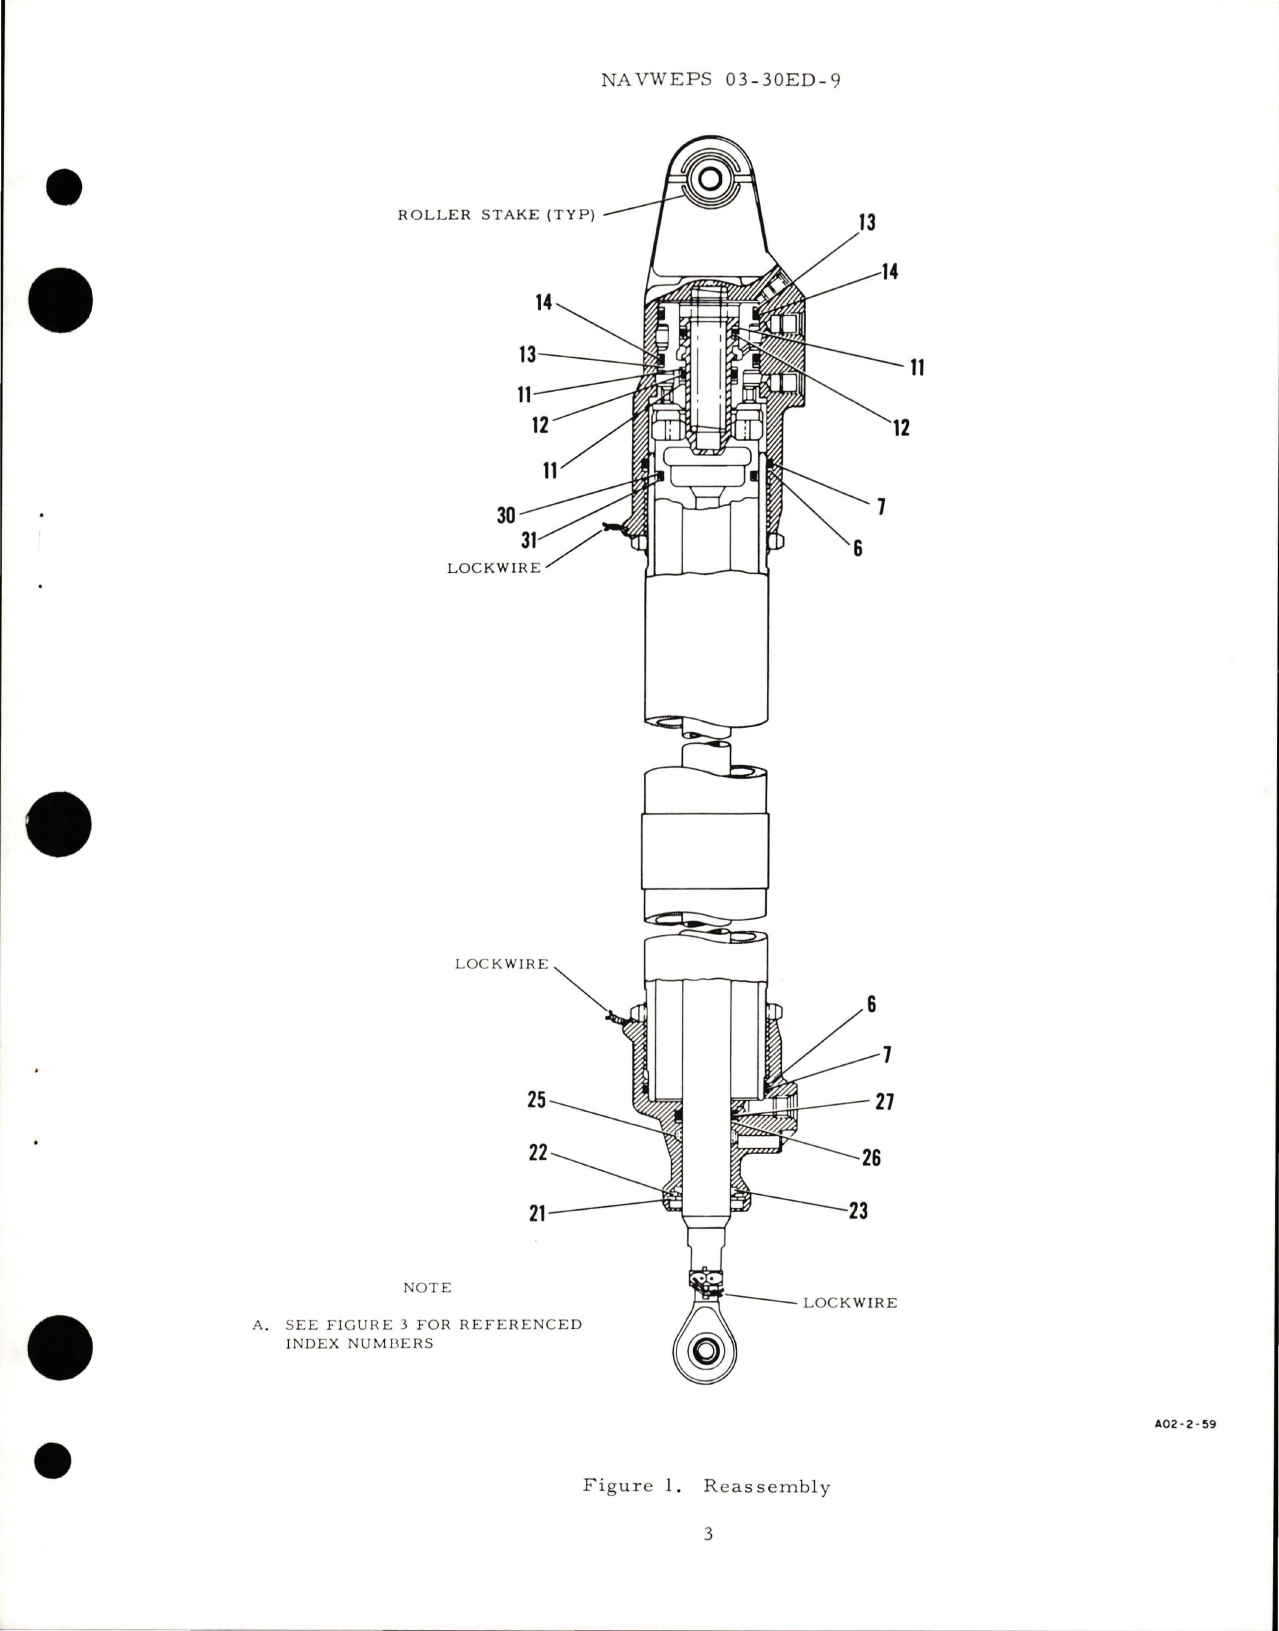 Sample page 5 from AirCorps Library document: Overhaul Instructions with Parts Breakdown for Ramp Actuating Cylinder - Part A02H4700-1